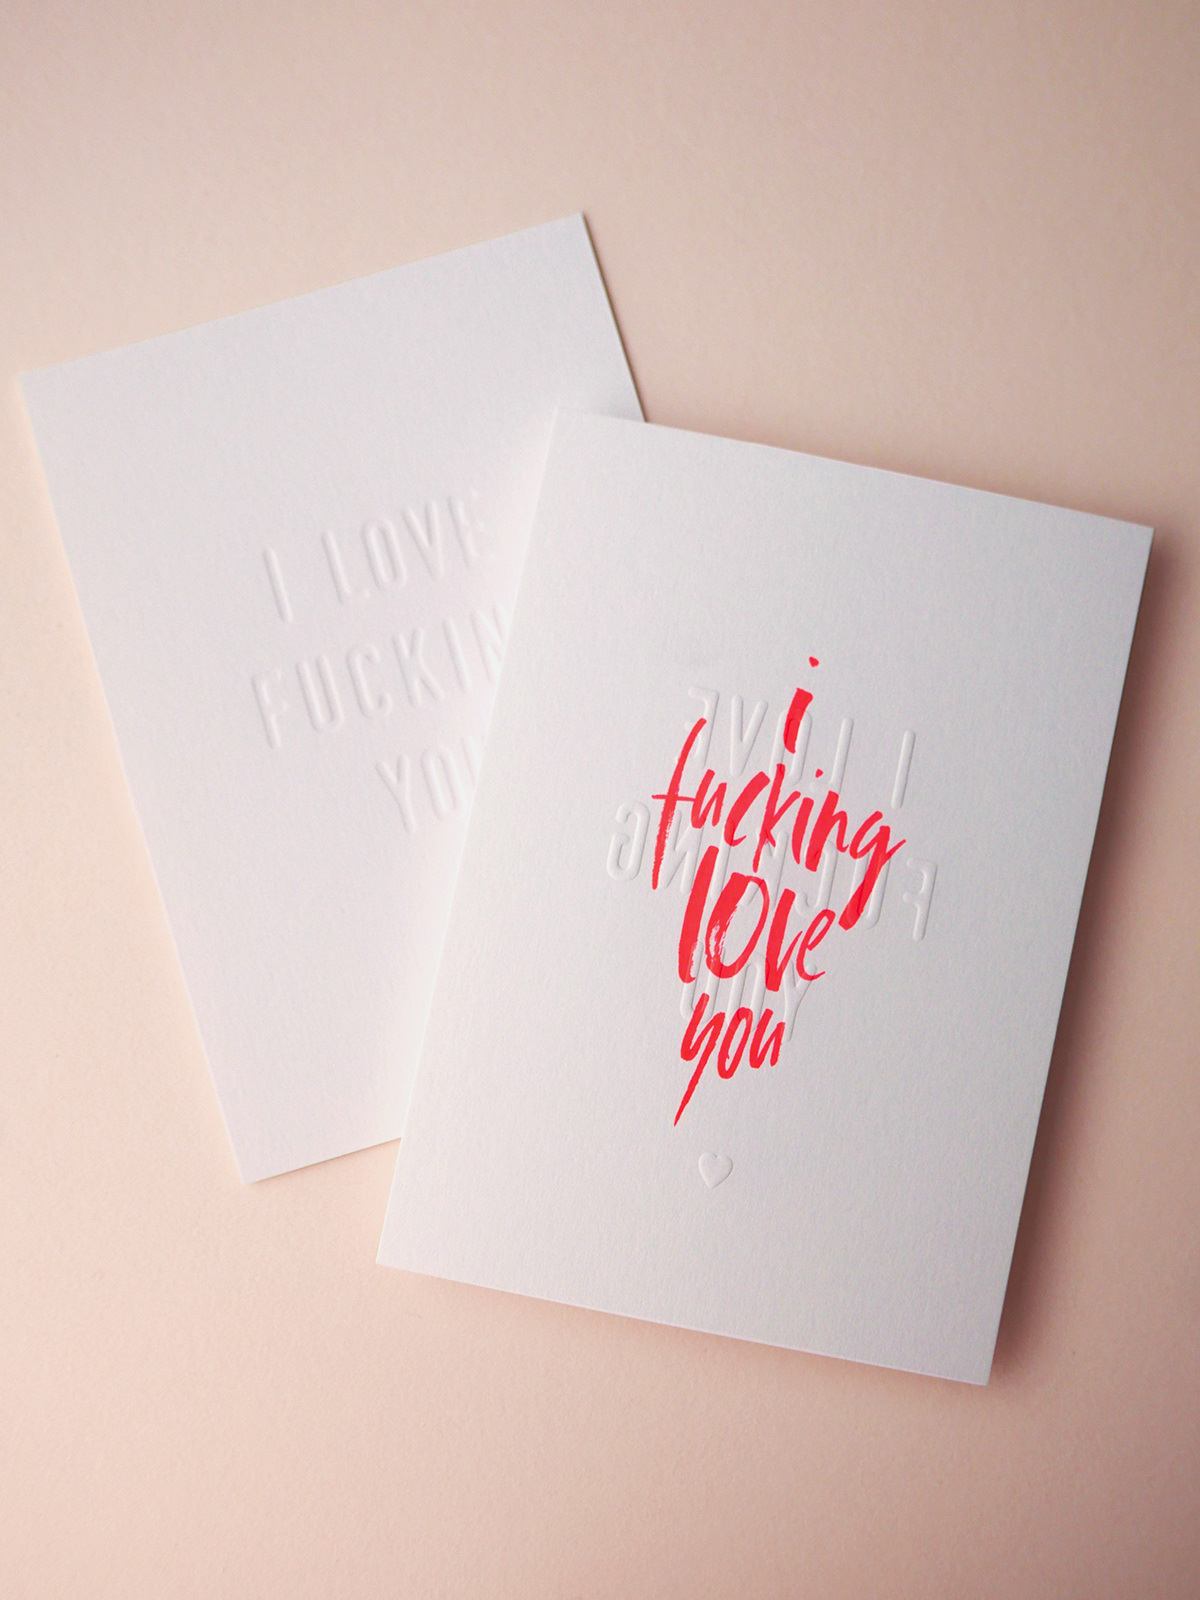 debossing embossing greeting cards hotfoil letterpress Love neon postcard Valentine's Day holographic